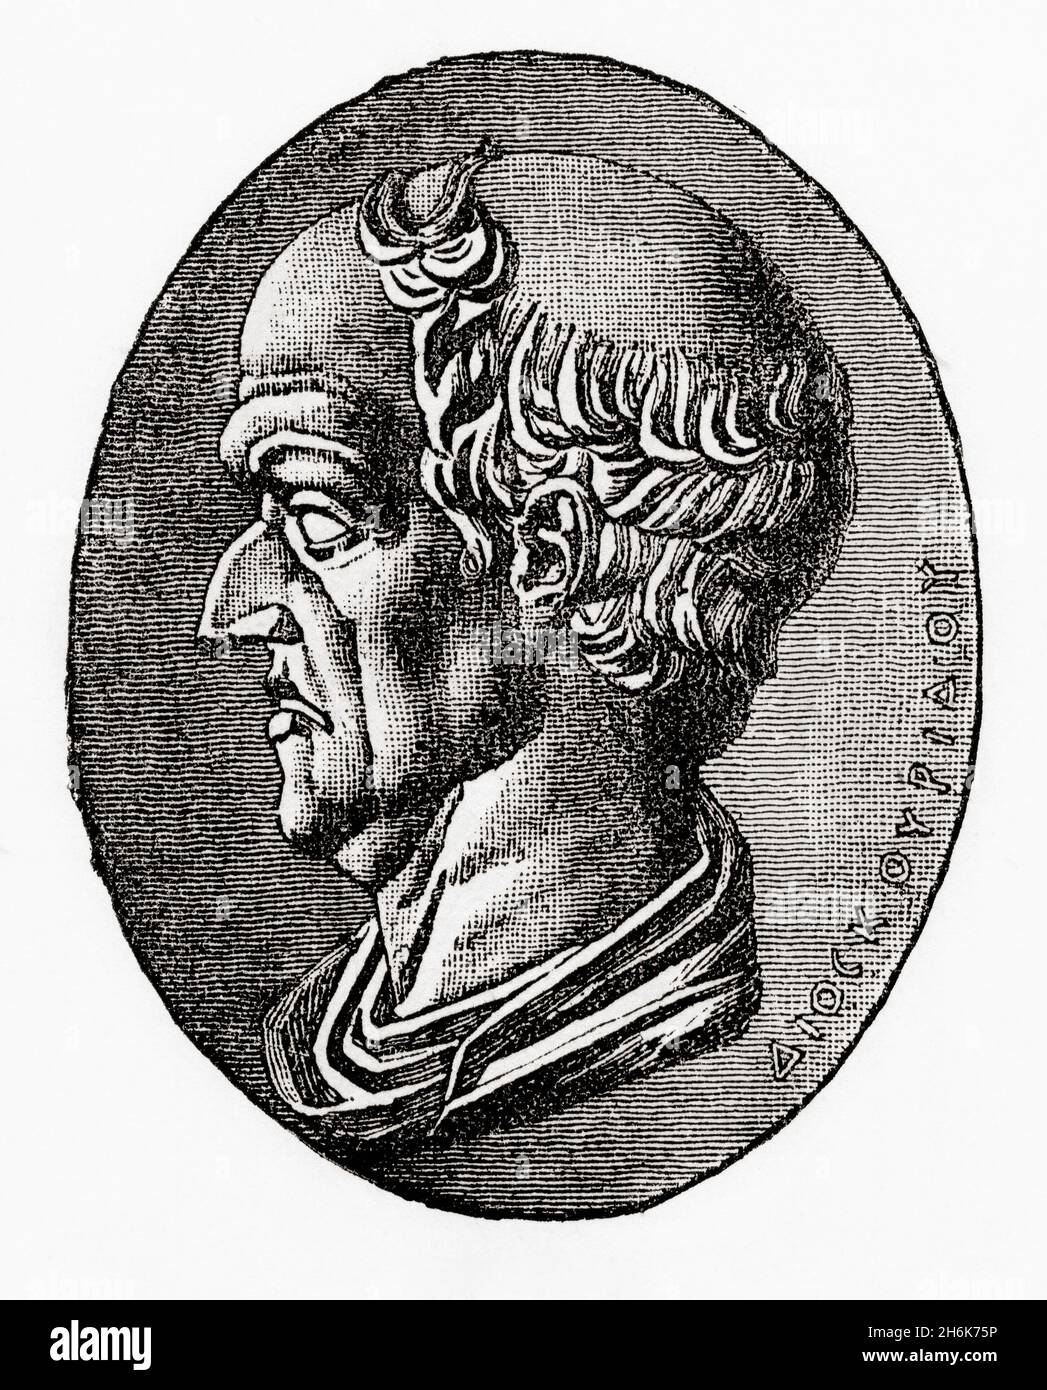 Gāius Cilnius Maecēnās, c. 70 BC – 8 BC.  Friend and political advisor to Octavian.  From Cassell's Illustrated Universal History, published 1883. Stock Photo